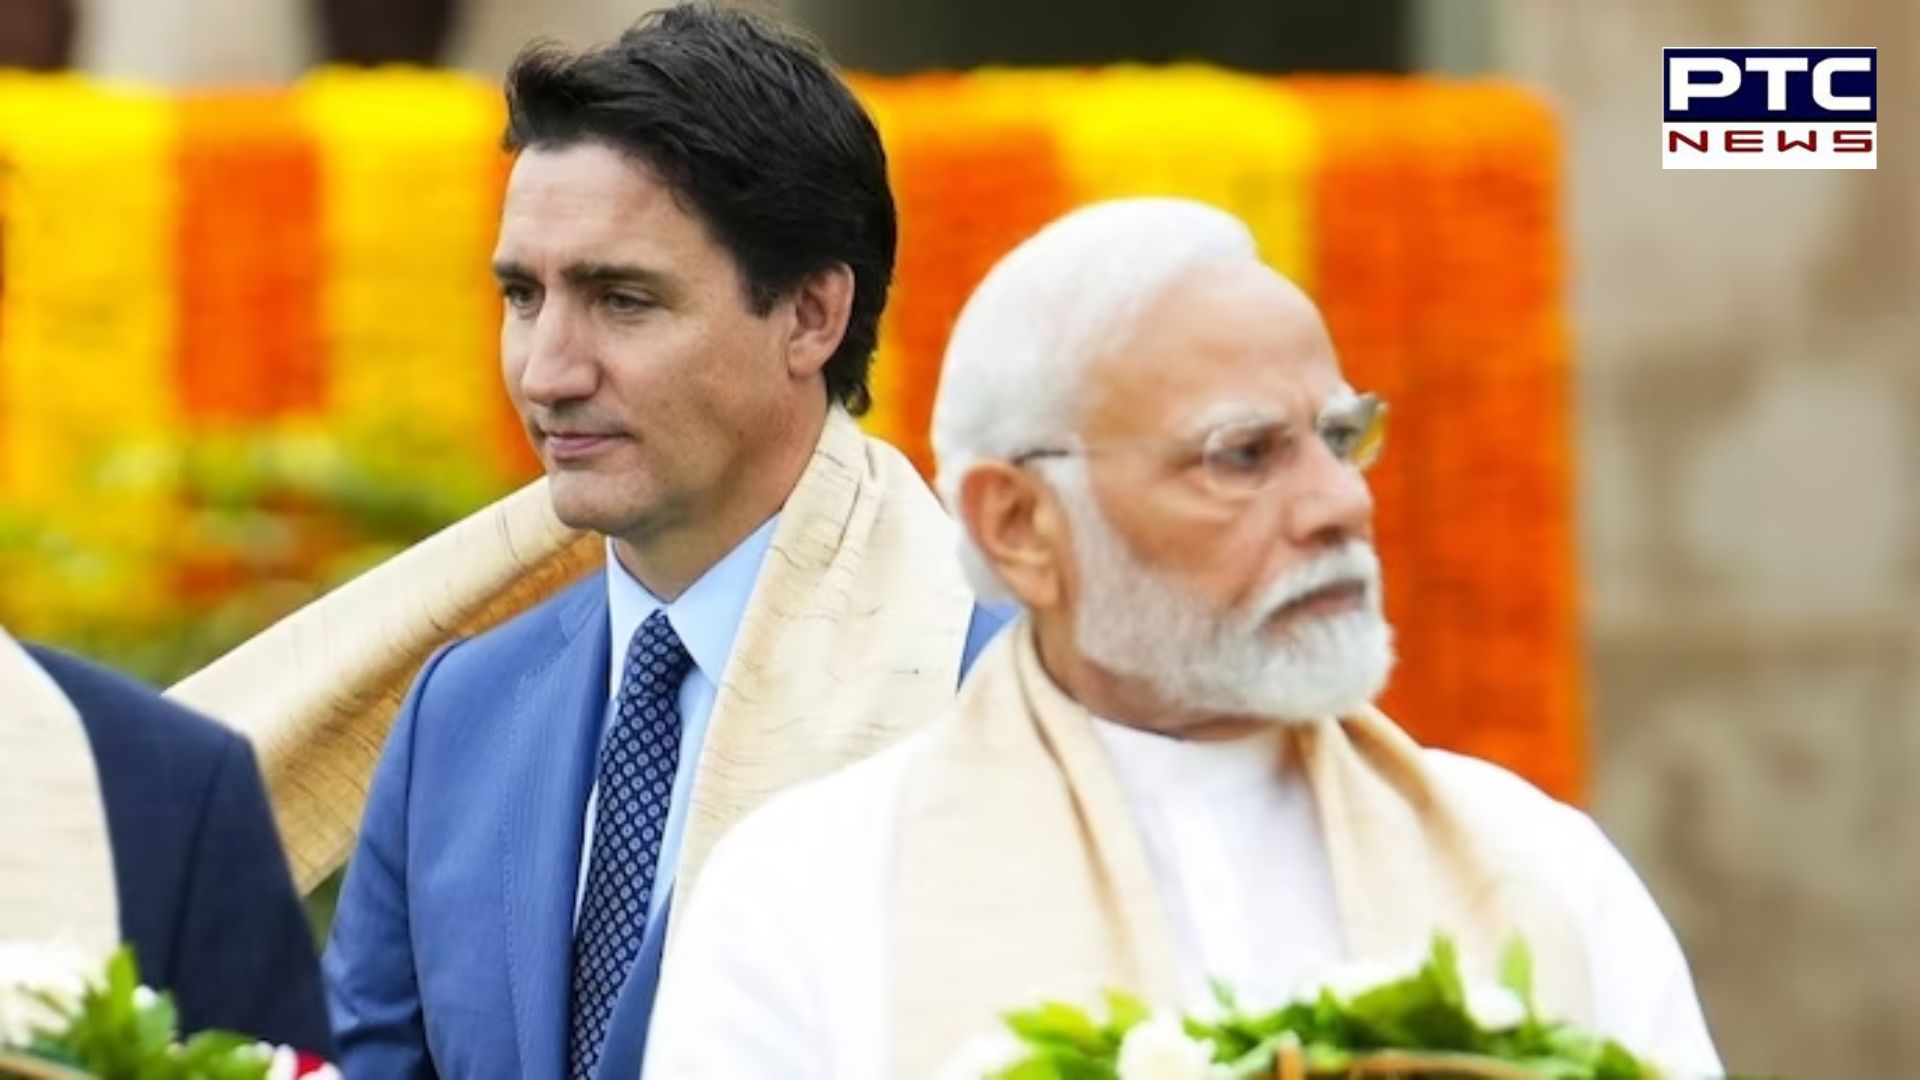 Indian students avoid Canada amid diplomatic row, minister reports 86% decline